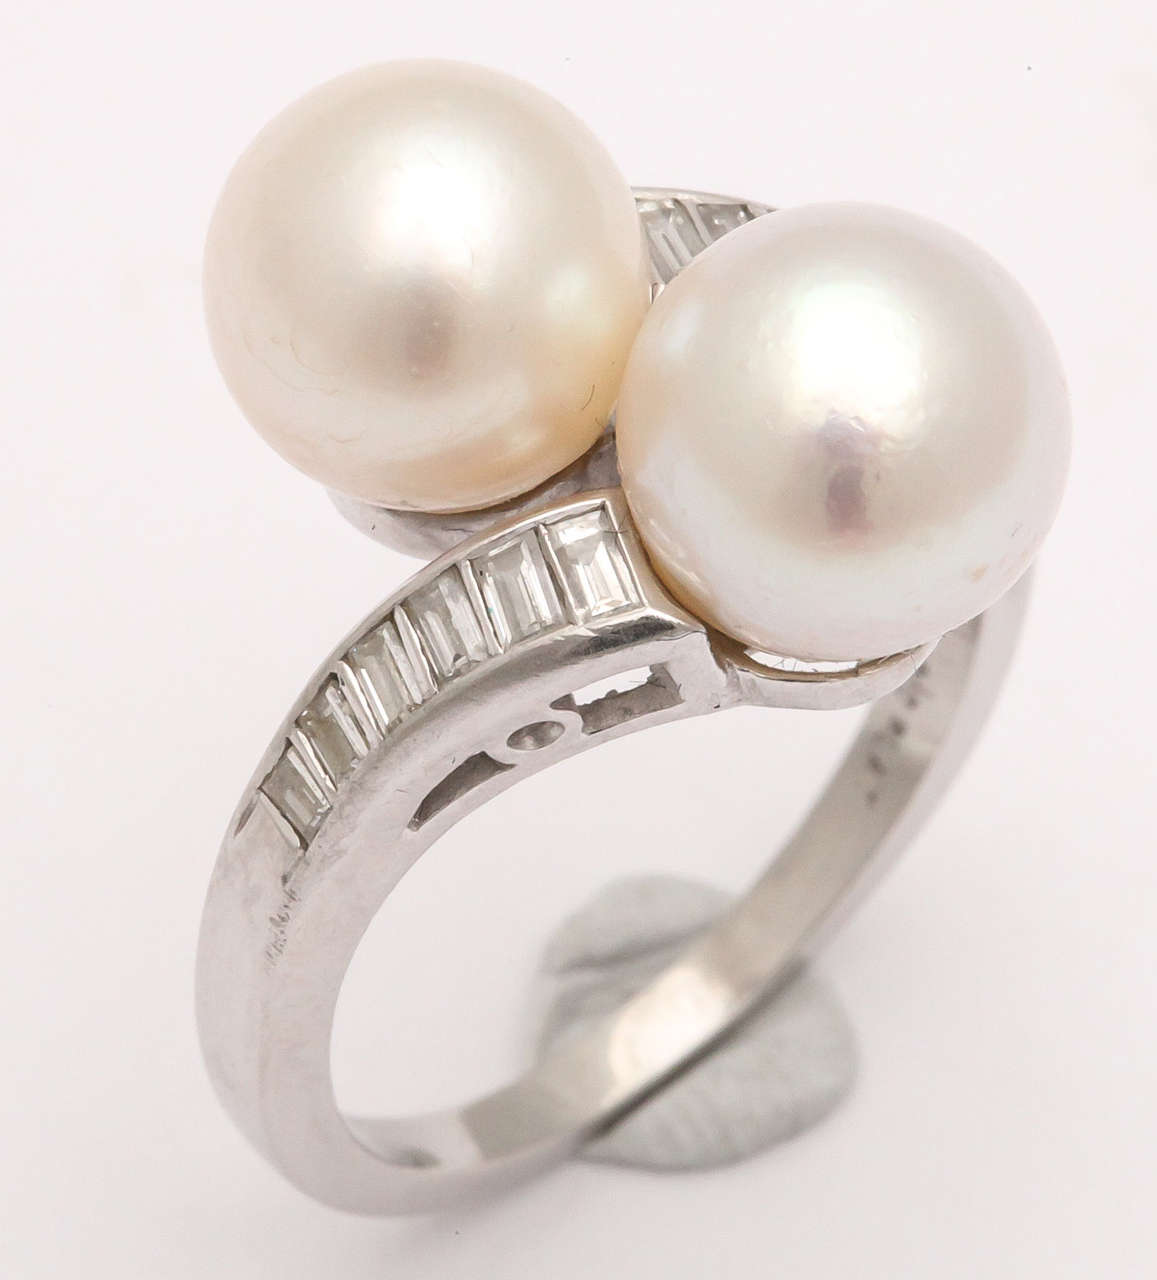 Crossover Platinum mounting  set with a Pair of 9mm Cultured Pearls, and detailed with 6 graduated Diamond Baguettes on either side.  Perfect for a chic pinky ring or non Diamond Engagement Ring.  Size 7 will fit perfectly or it can be sized up or